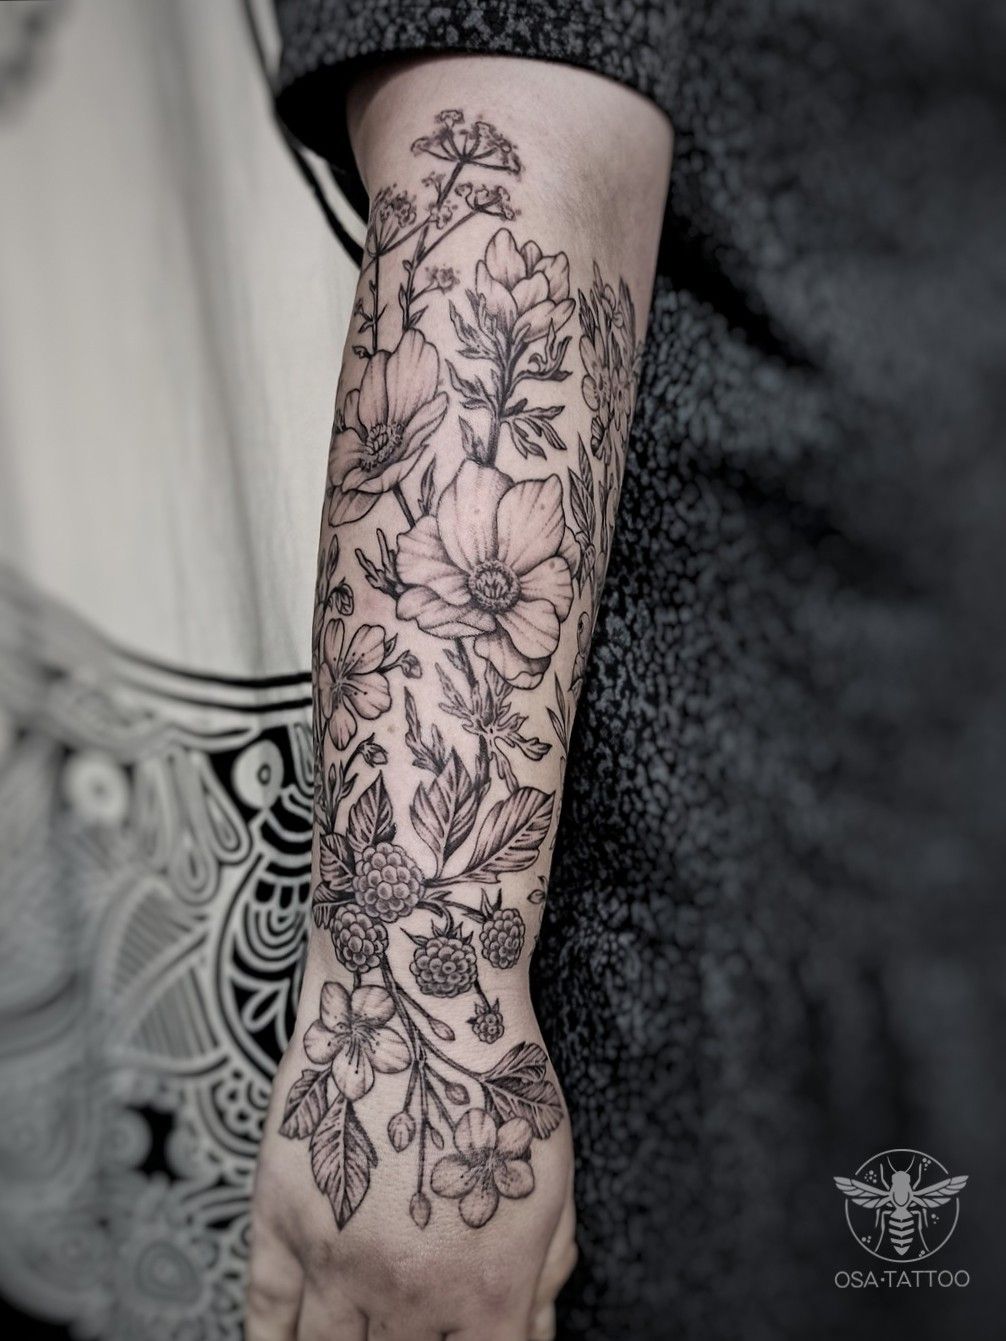 Six Artists Who Draw Gorgeous Botanical Tattoos  The New York Times